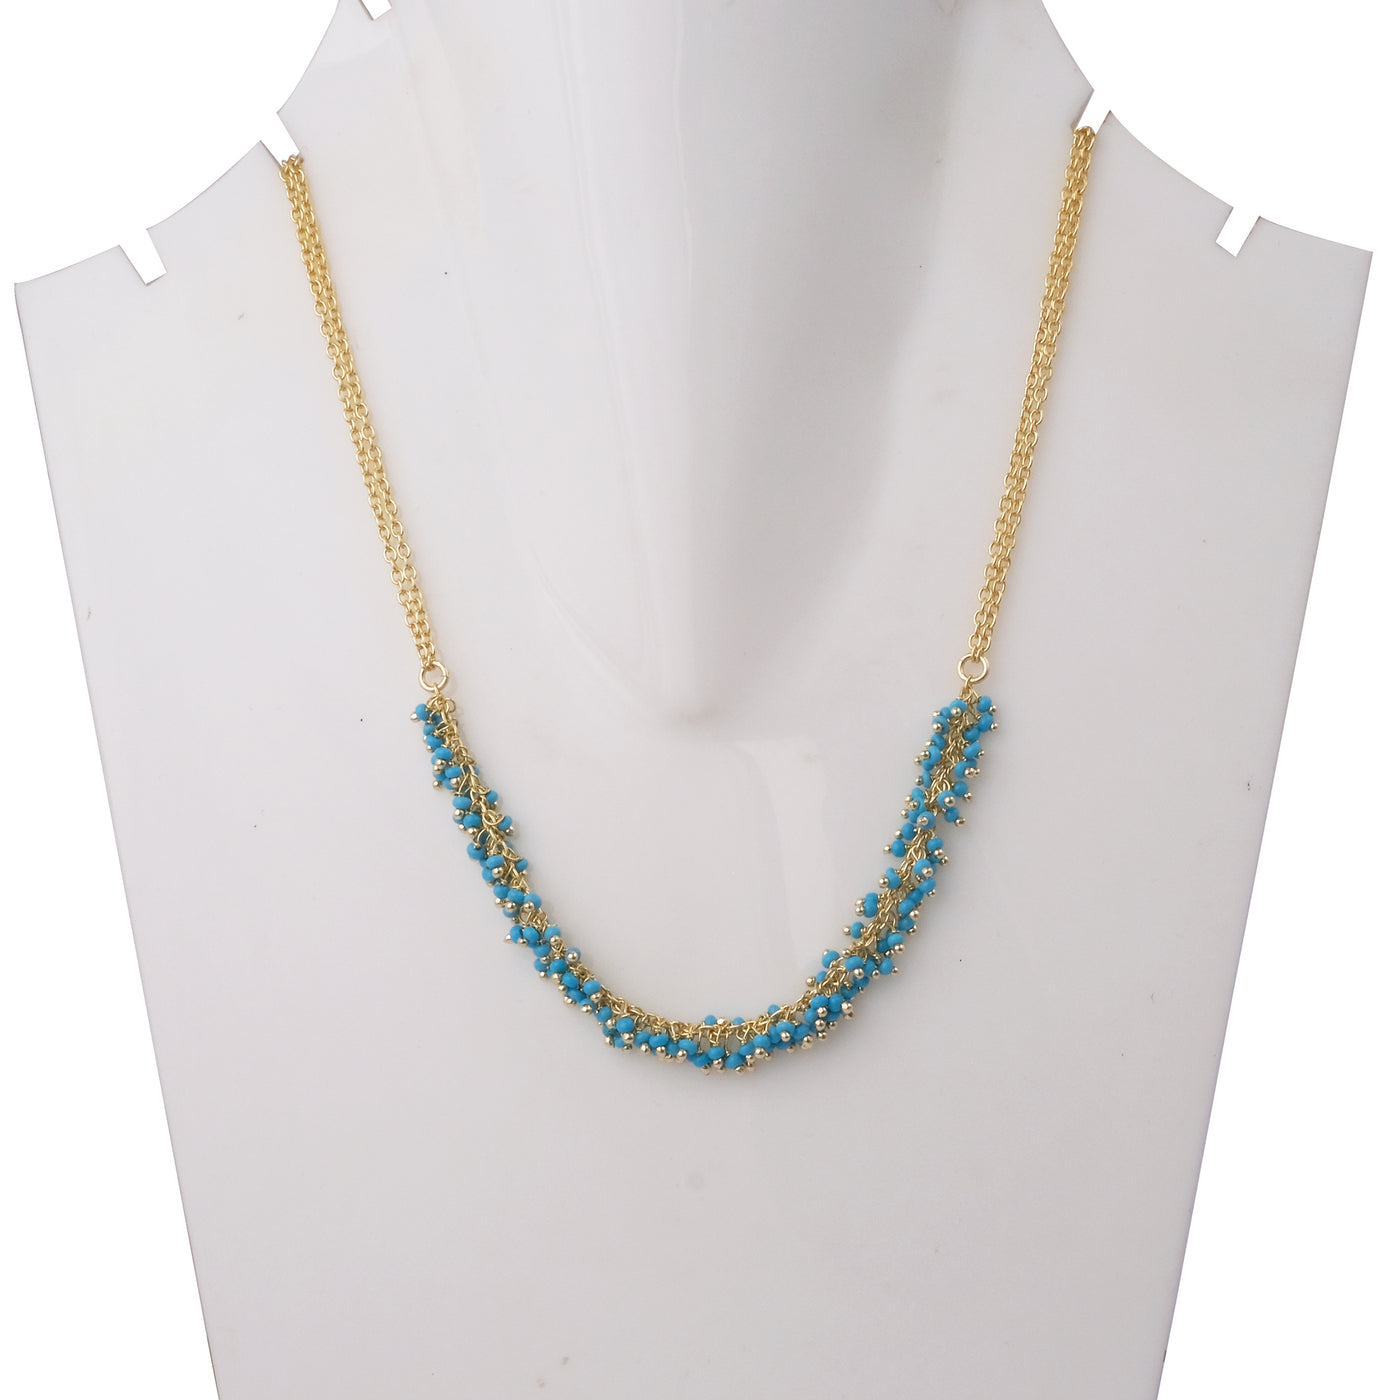 Gold Necklace with Turquoise Bead Clusters